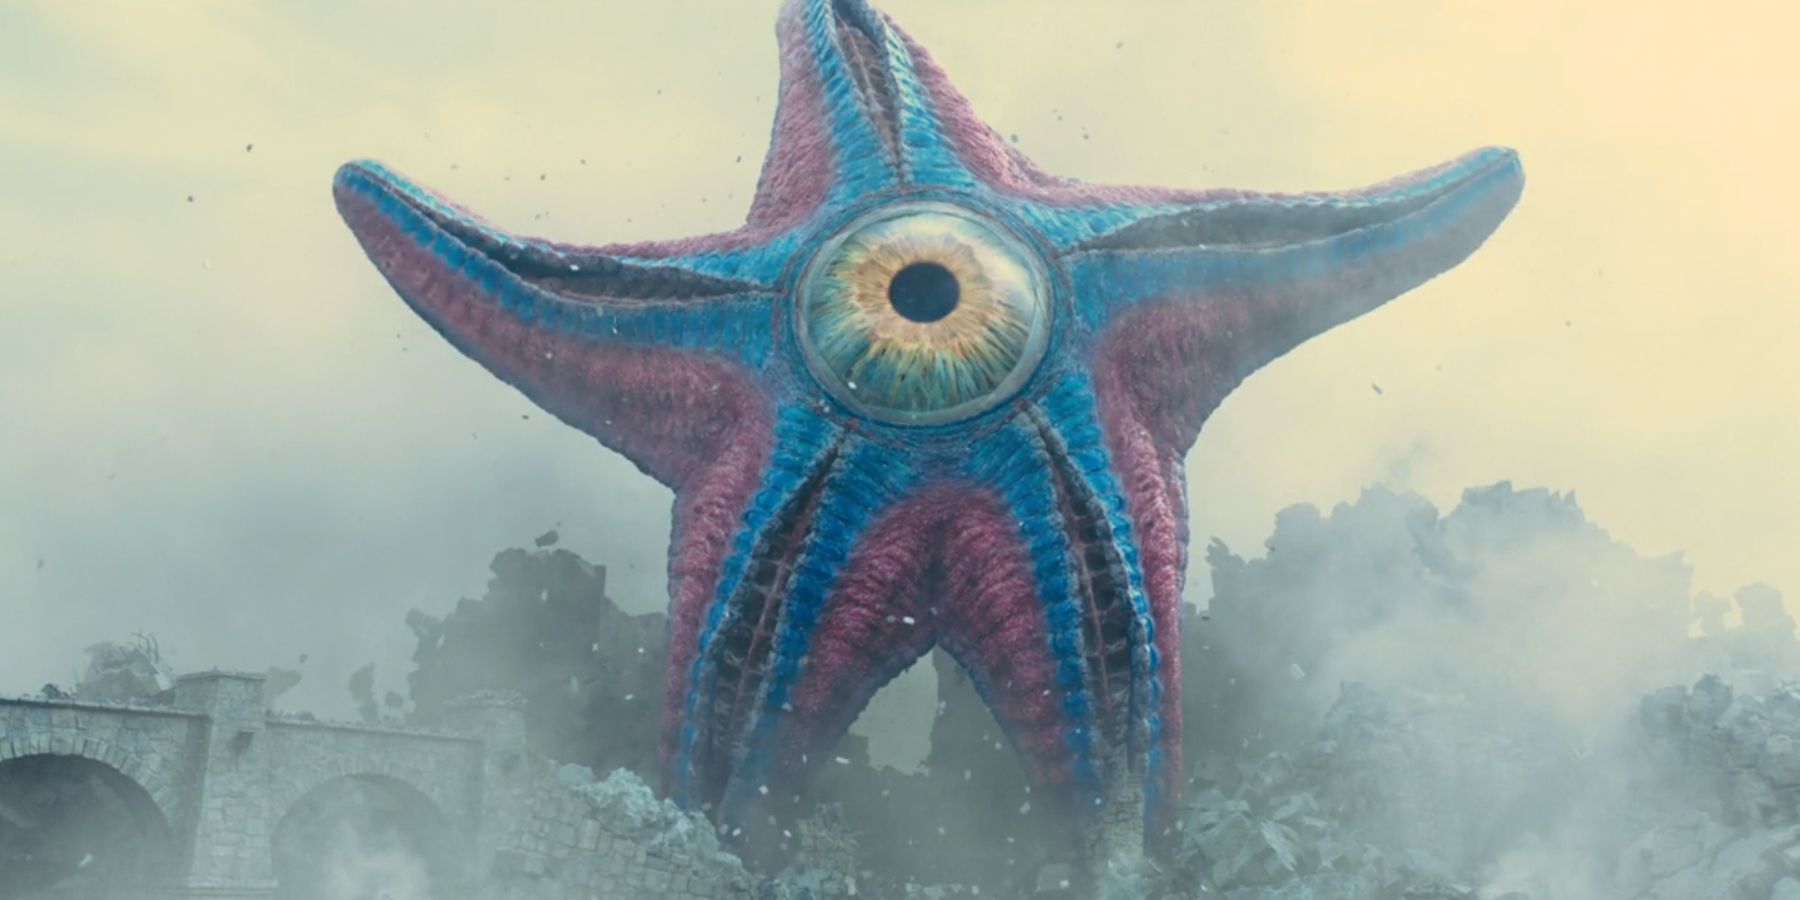 Starro the Conquerer breaking out of Jotunhein in James Gunn's The Suicide Squad.